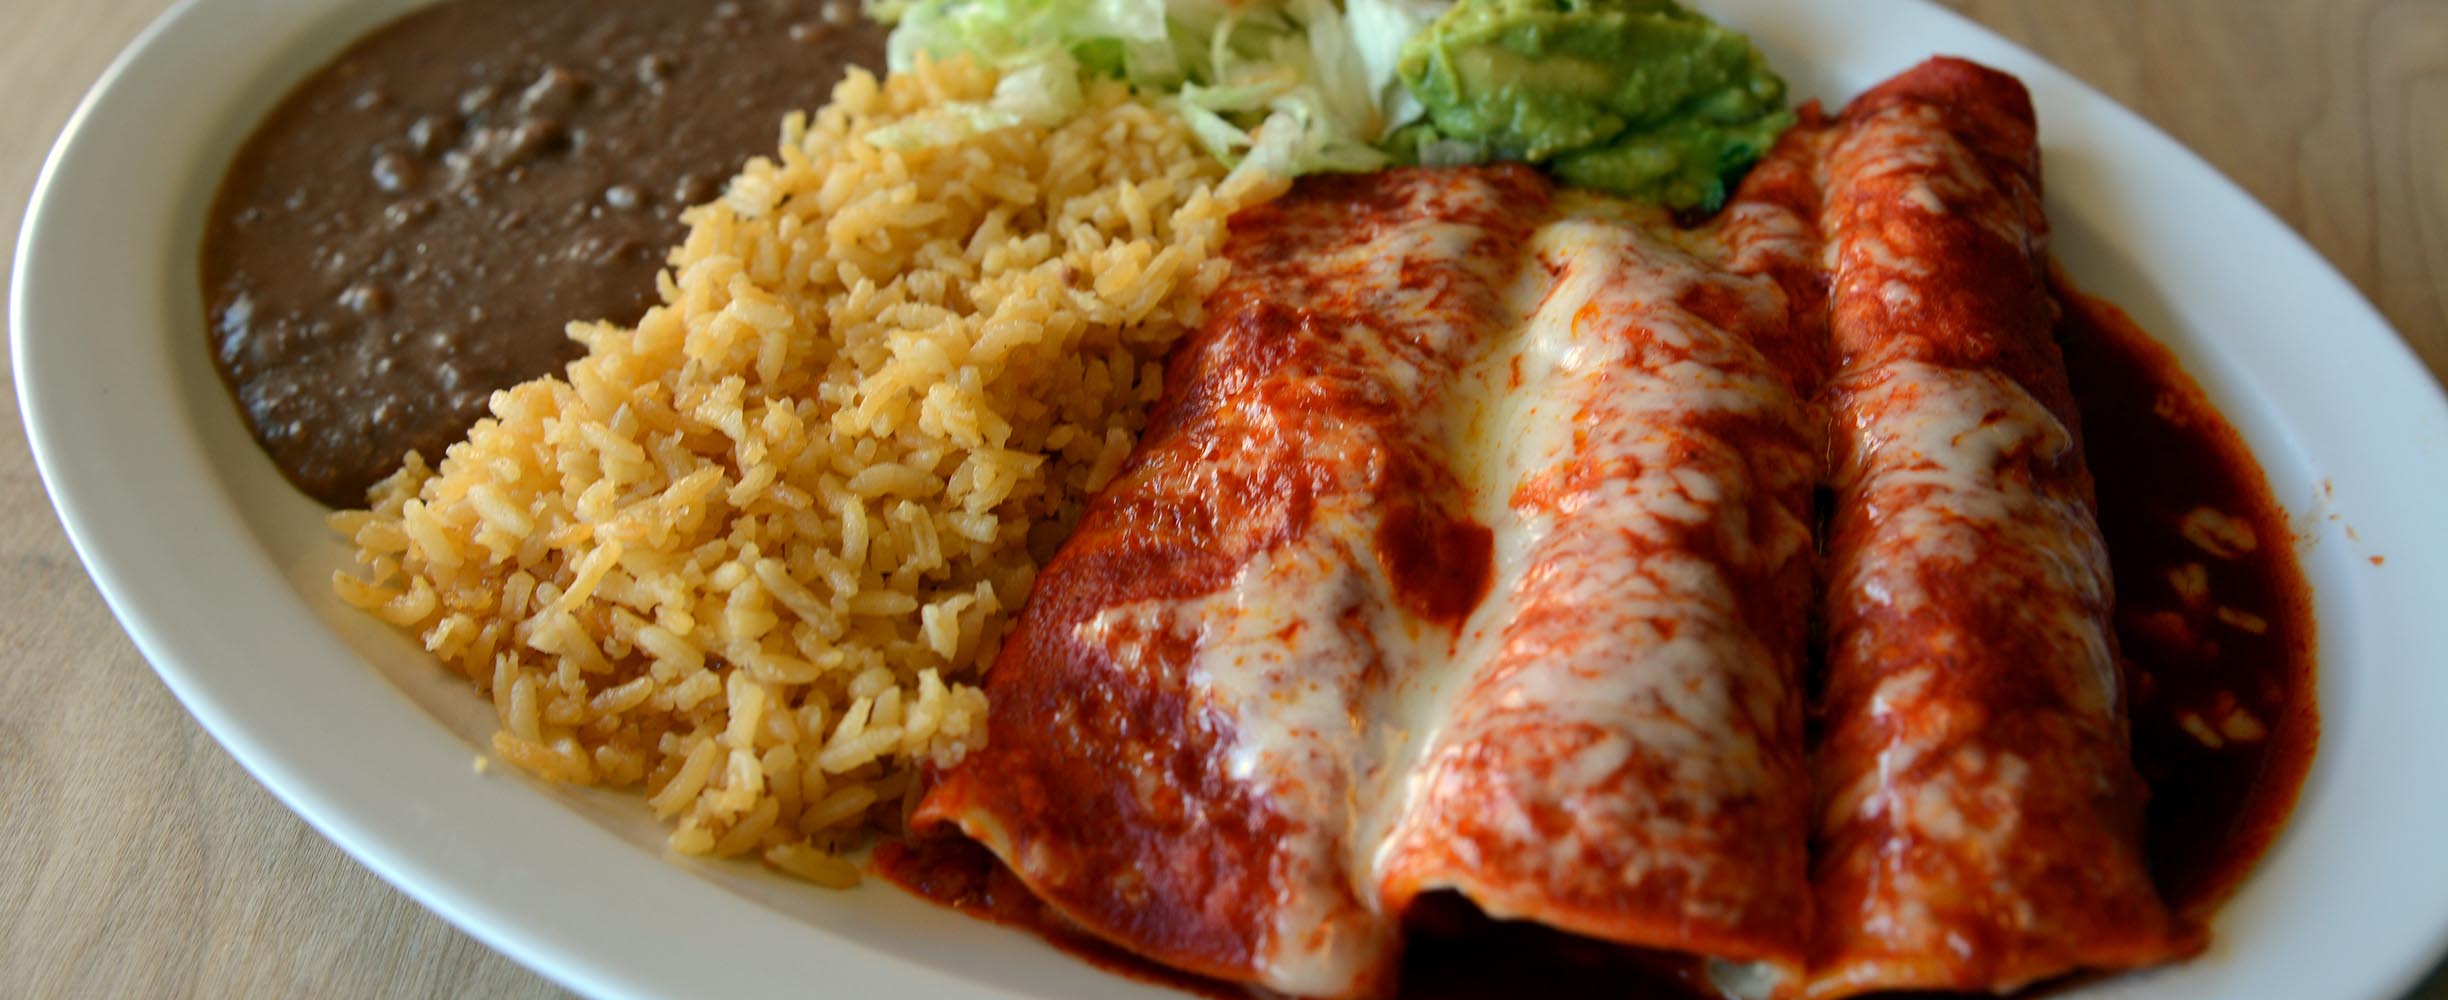  Flautas, a typical and traditiopnal Mexican dish.